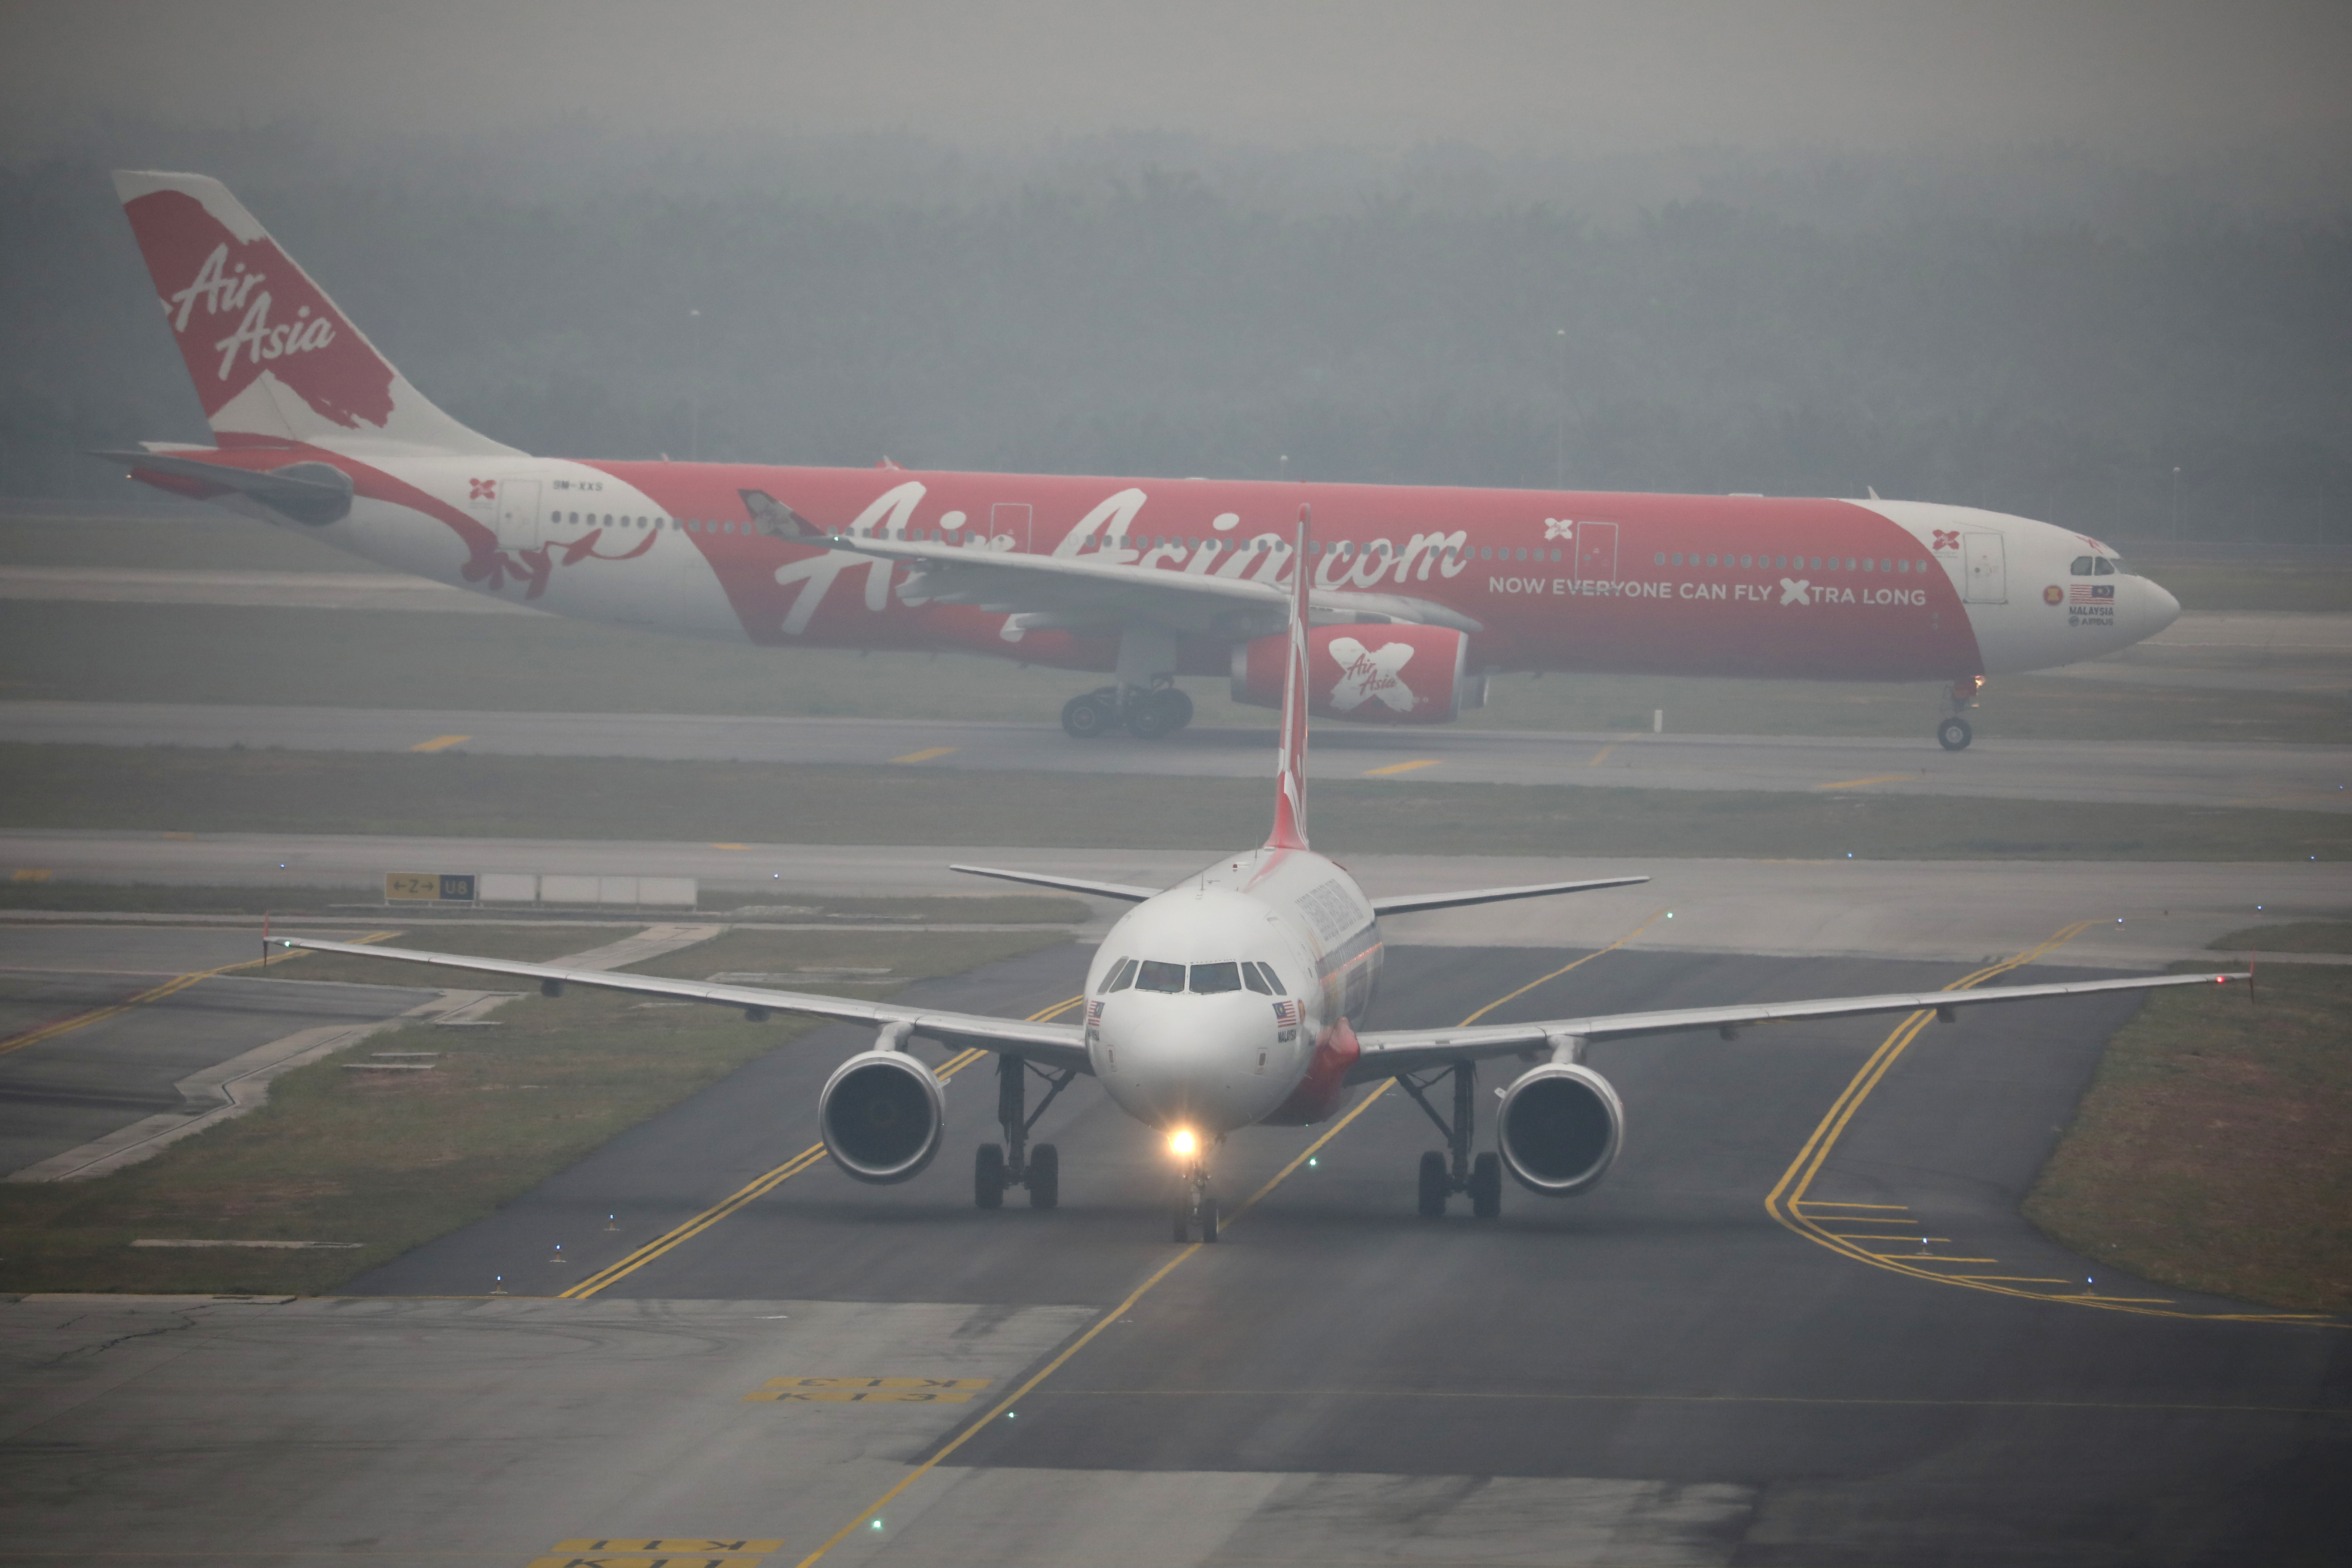 Air Asia airplanes are pictured on the haze-shrouded tarmac at Kuala Lumpur International Airport 2 in Sepang, Malaysia, September 18, 2019. REUTERS/Lim Huey Teng